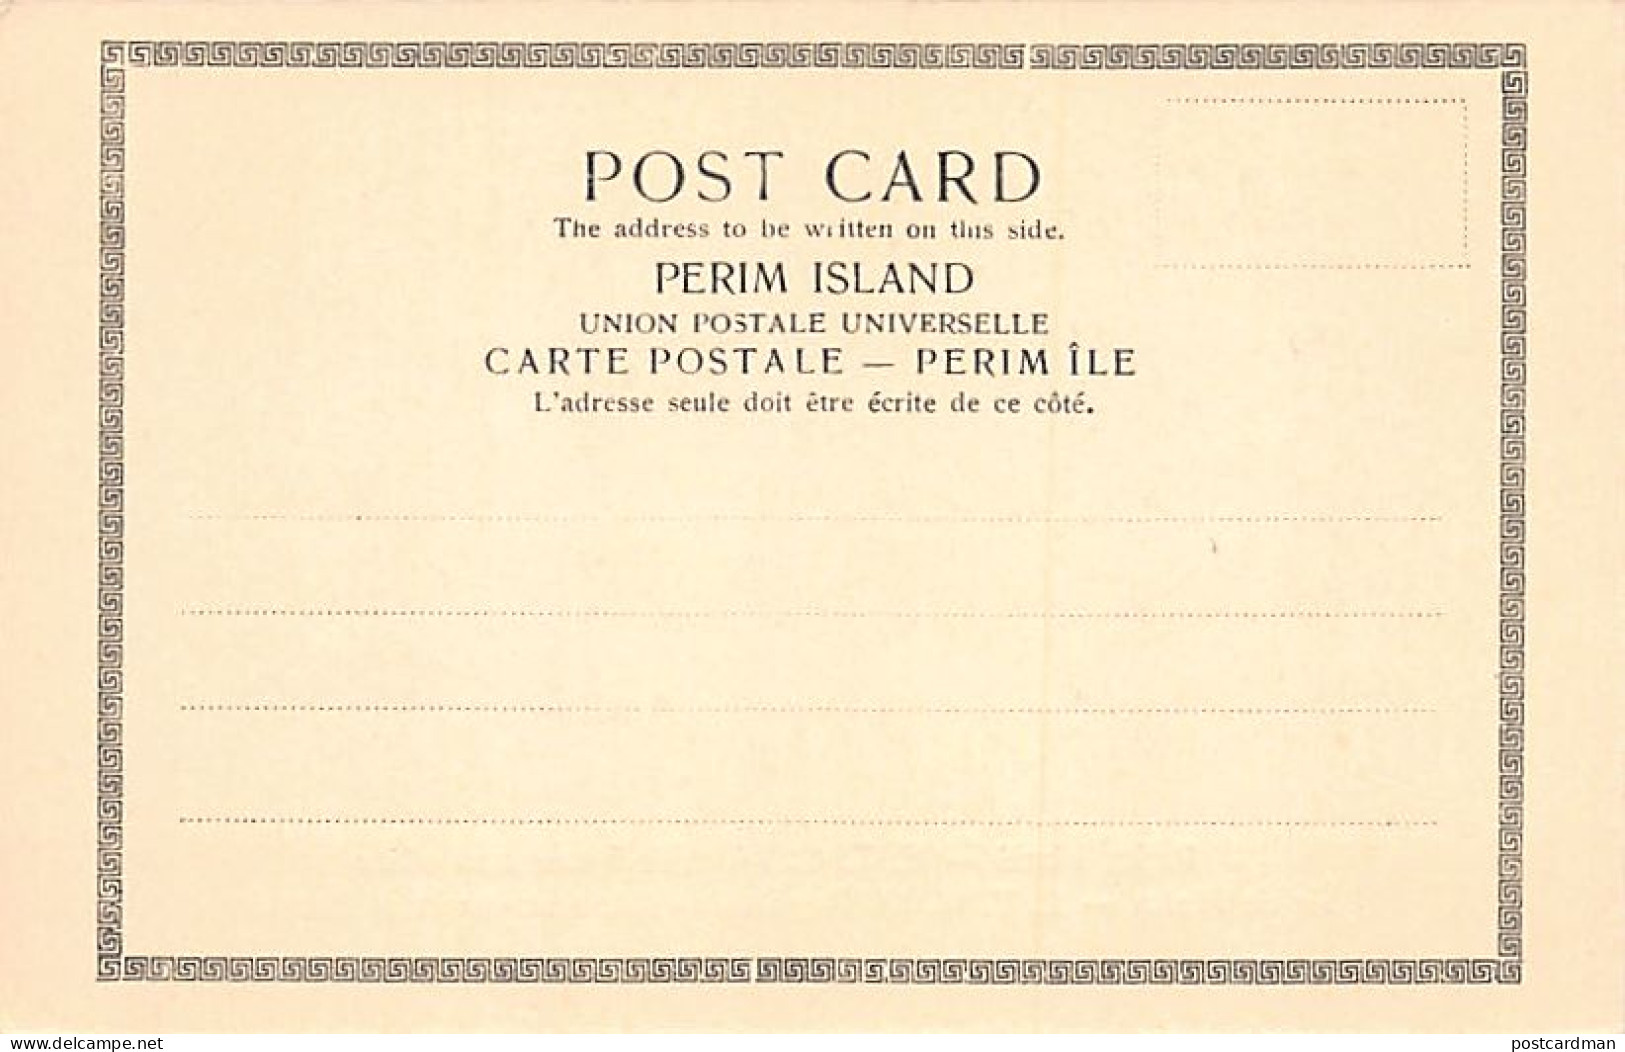 Yemen - PERIM ISLAND - E.T.C. Ltd. Cable House And Office - Publ. Unknown  - Yemen